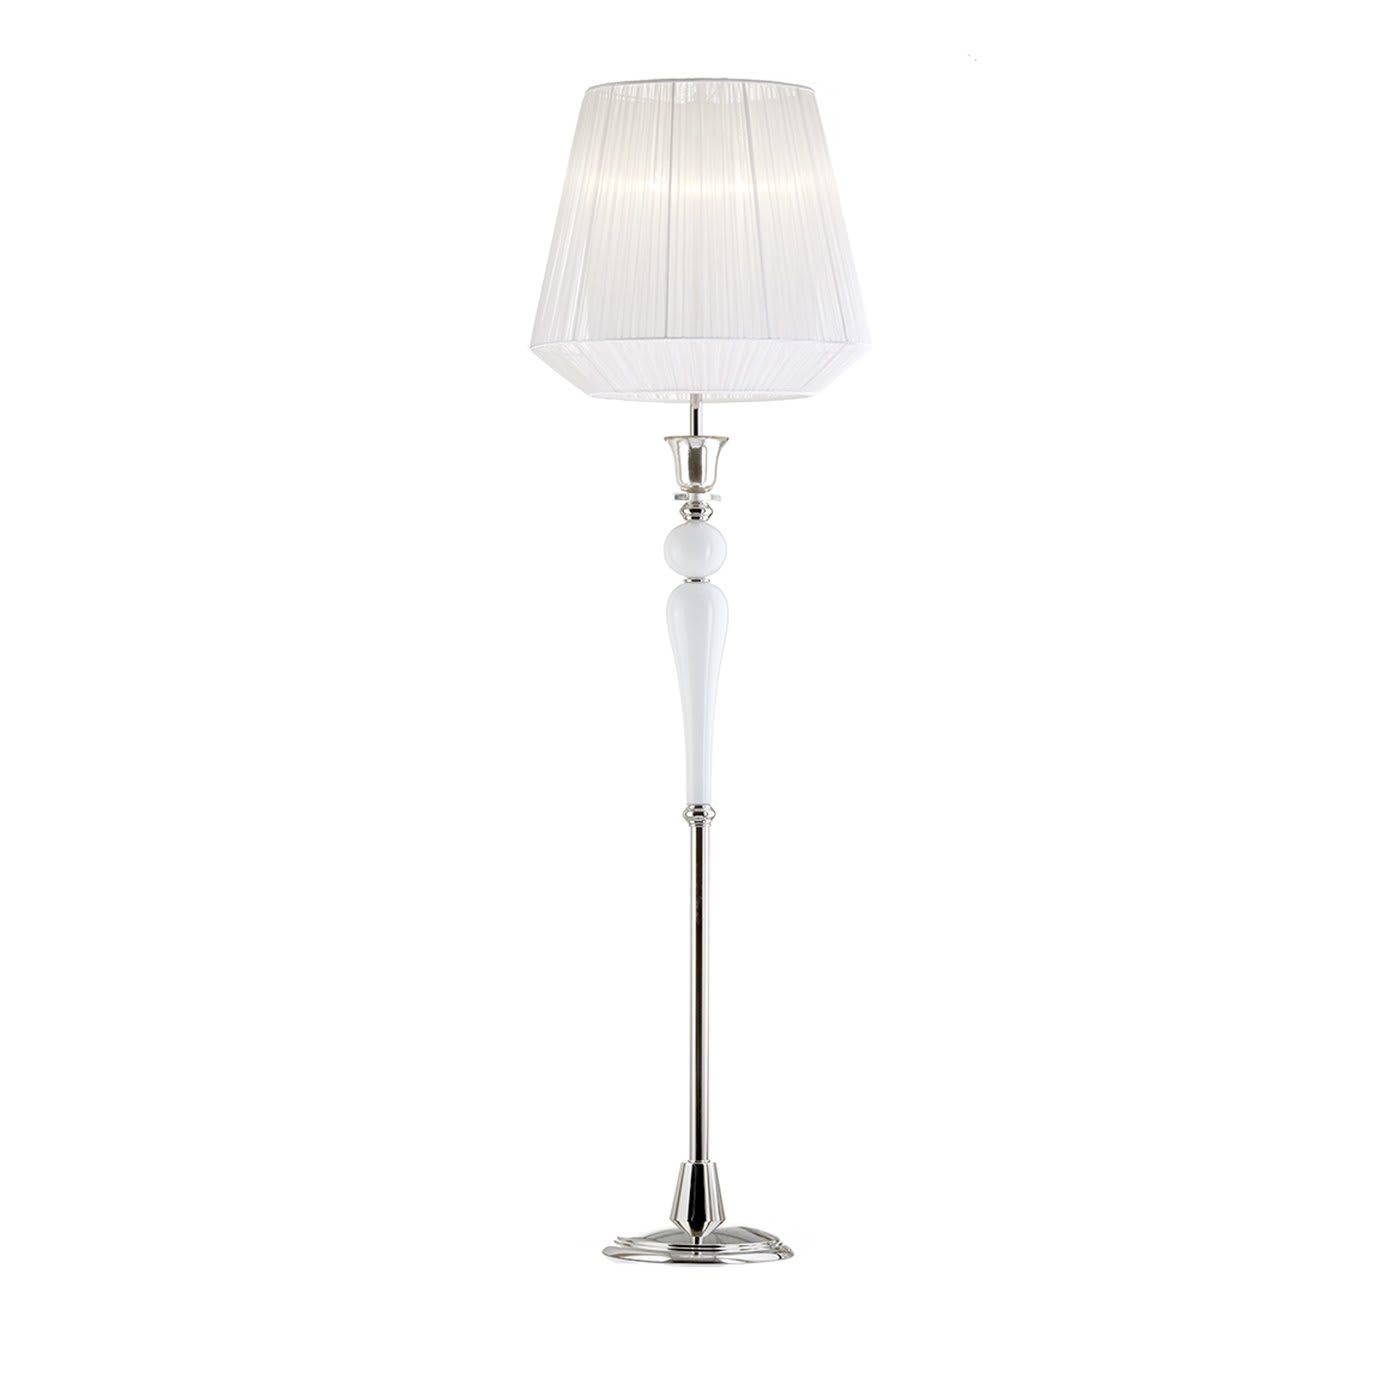 White and Silver Venetian Glass Floor Lamp - Il Paralume Marina